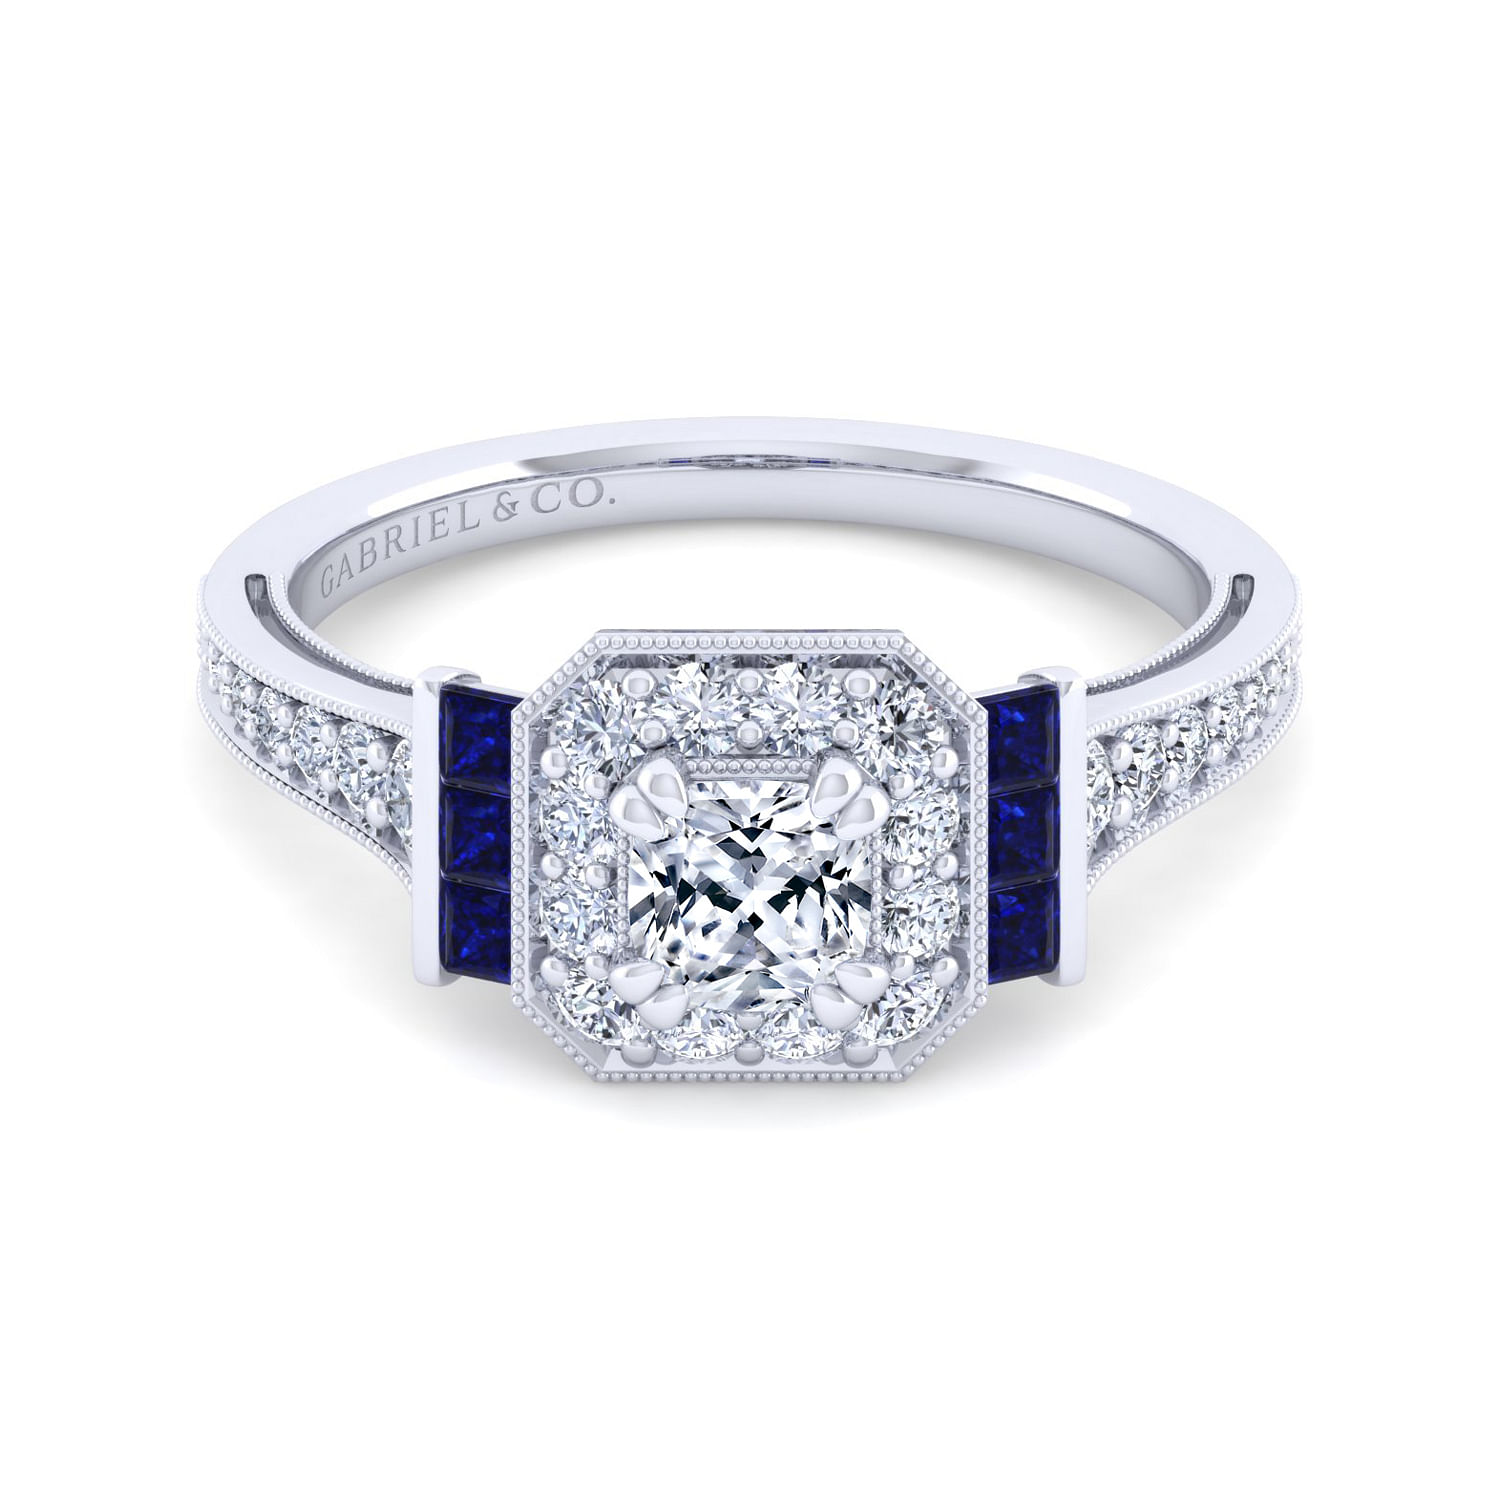 Vintage Inspired 14K White Gold Cushion Halo Sapphire and Diamond Engagement Ring